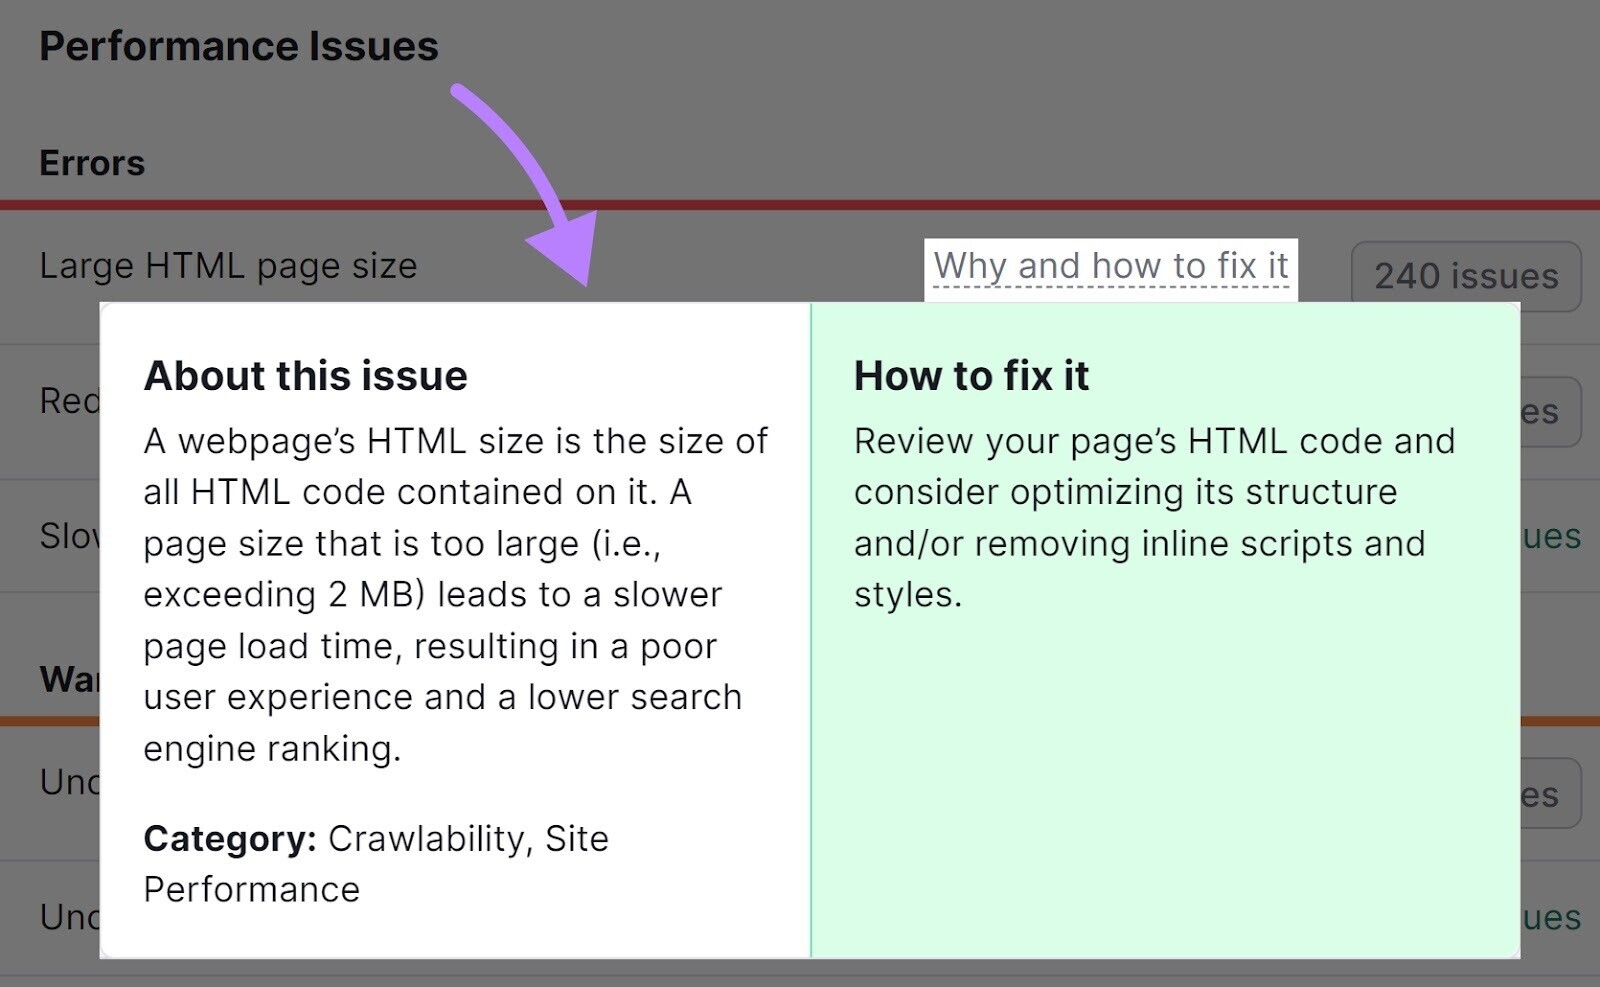 “Why and how to fix it” section for an issue with page load speed